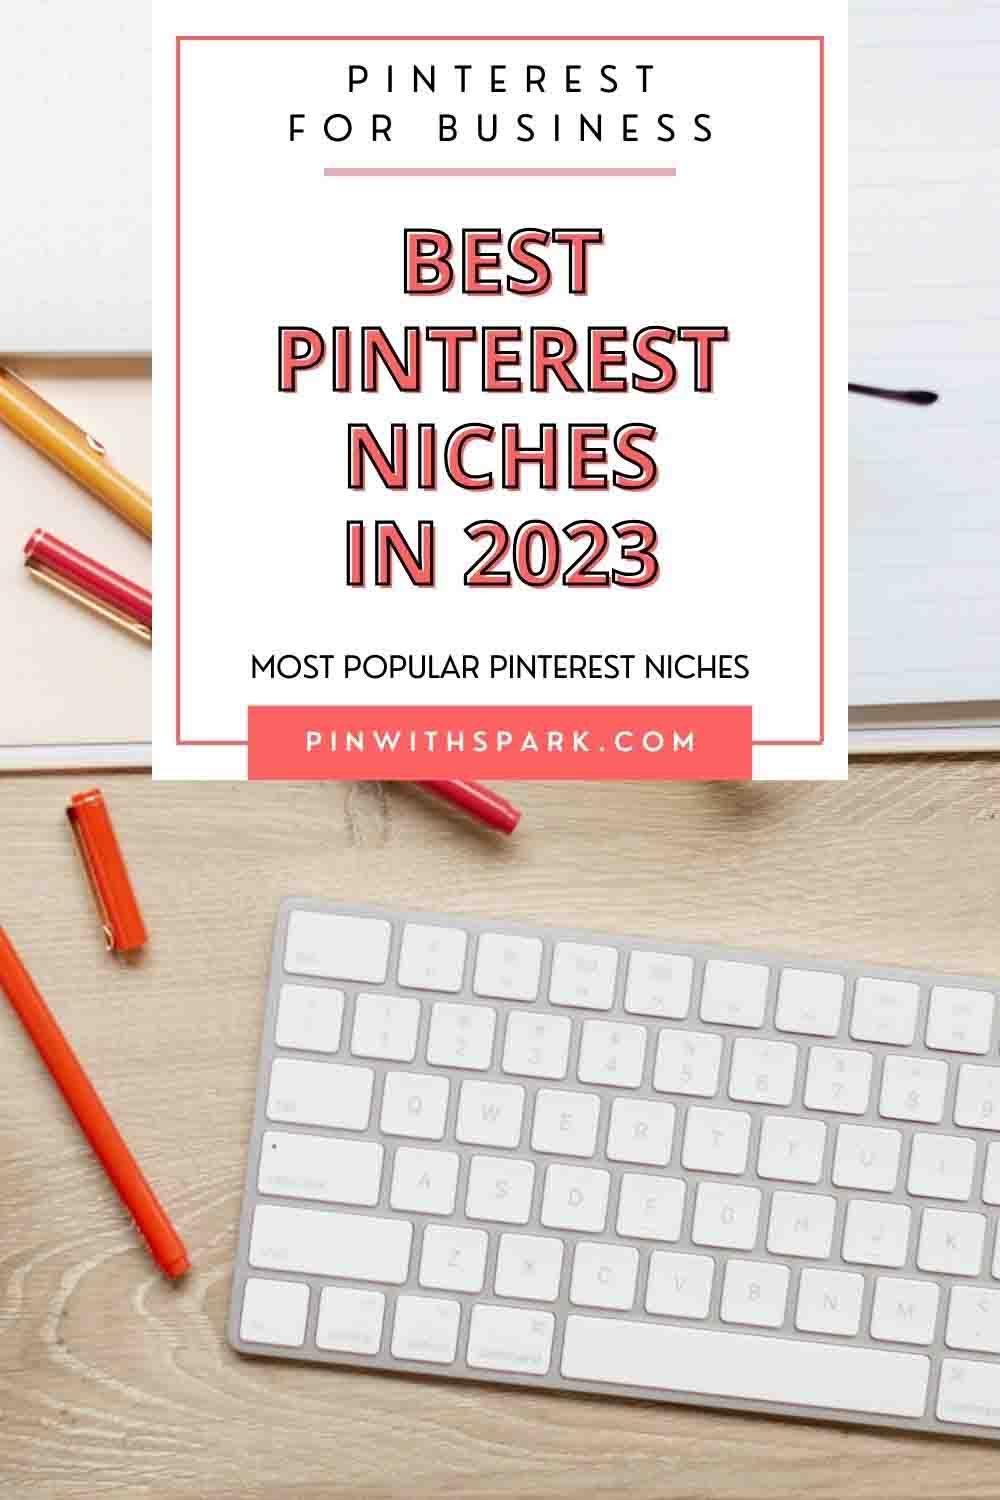 Best Pinterest niches in 2023 text overlay pinwithspark.com